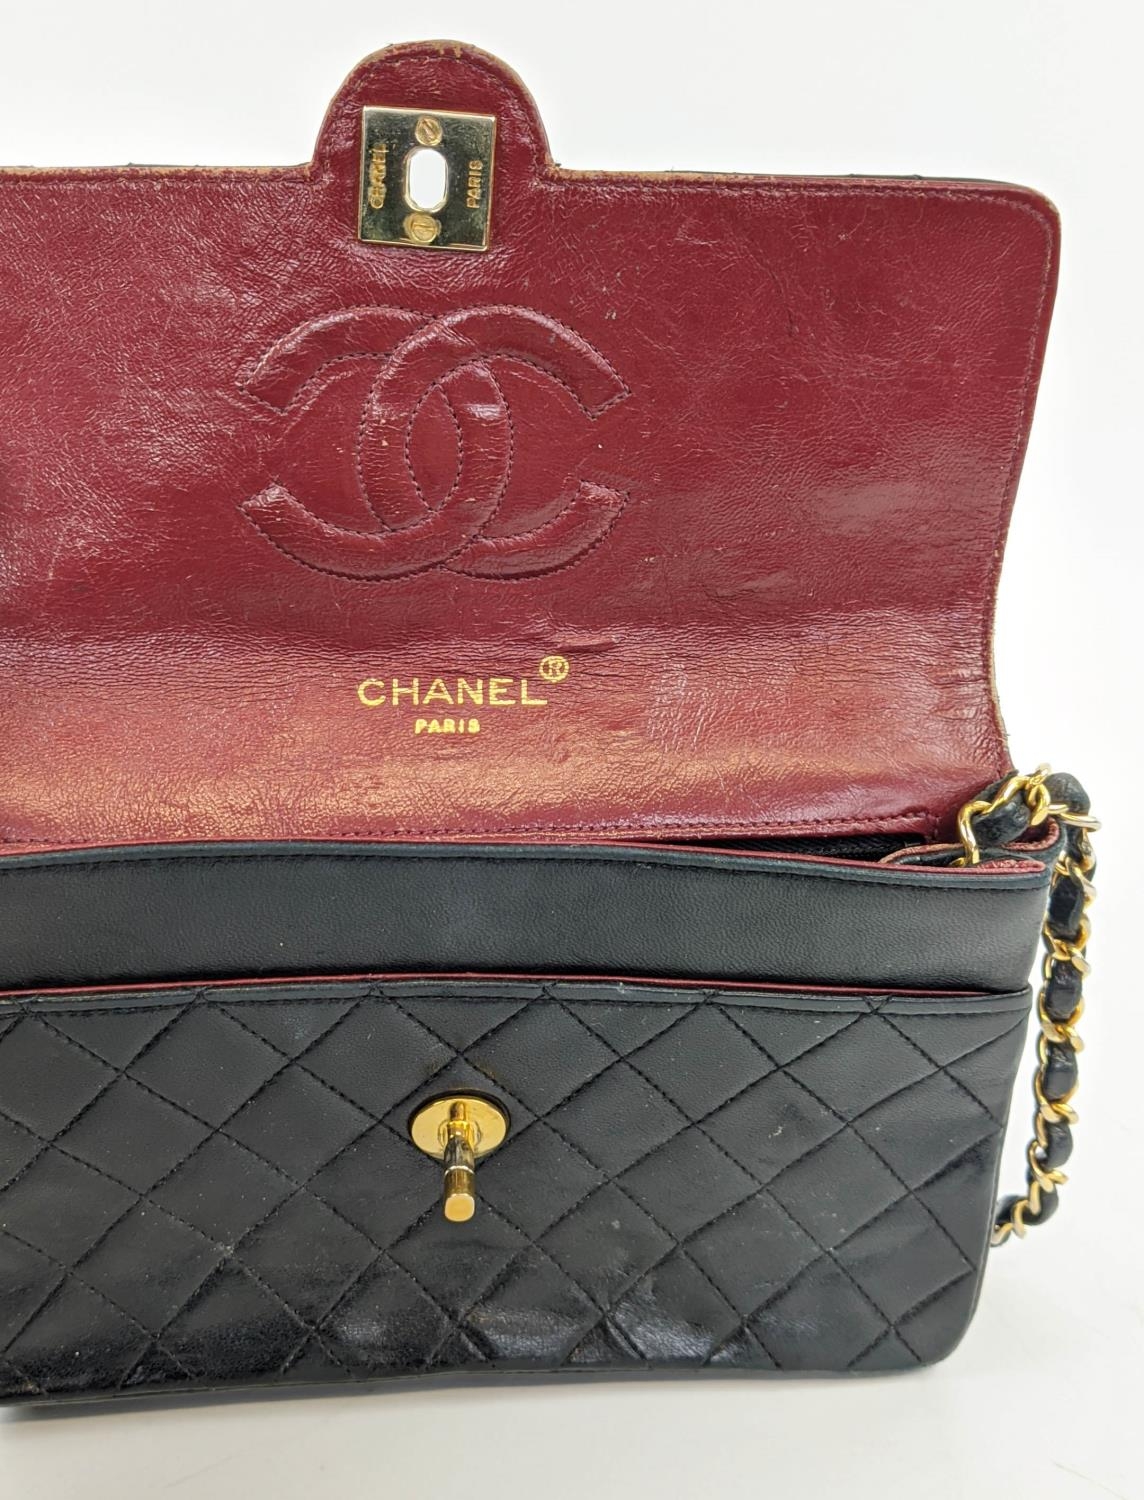 VINTAGE CHANEL FLAP BAG, round turn-lock, iconic burgundy leather lining, quilted front and back - Image 11 of 13